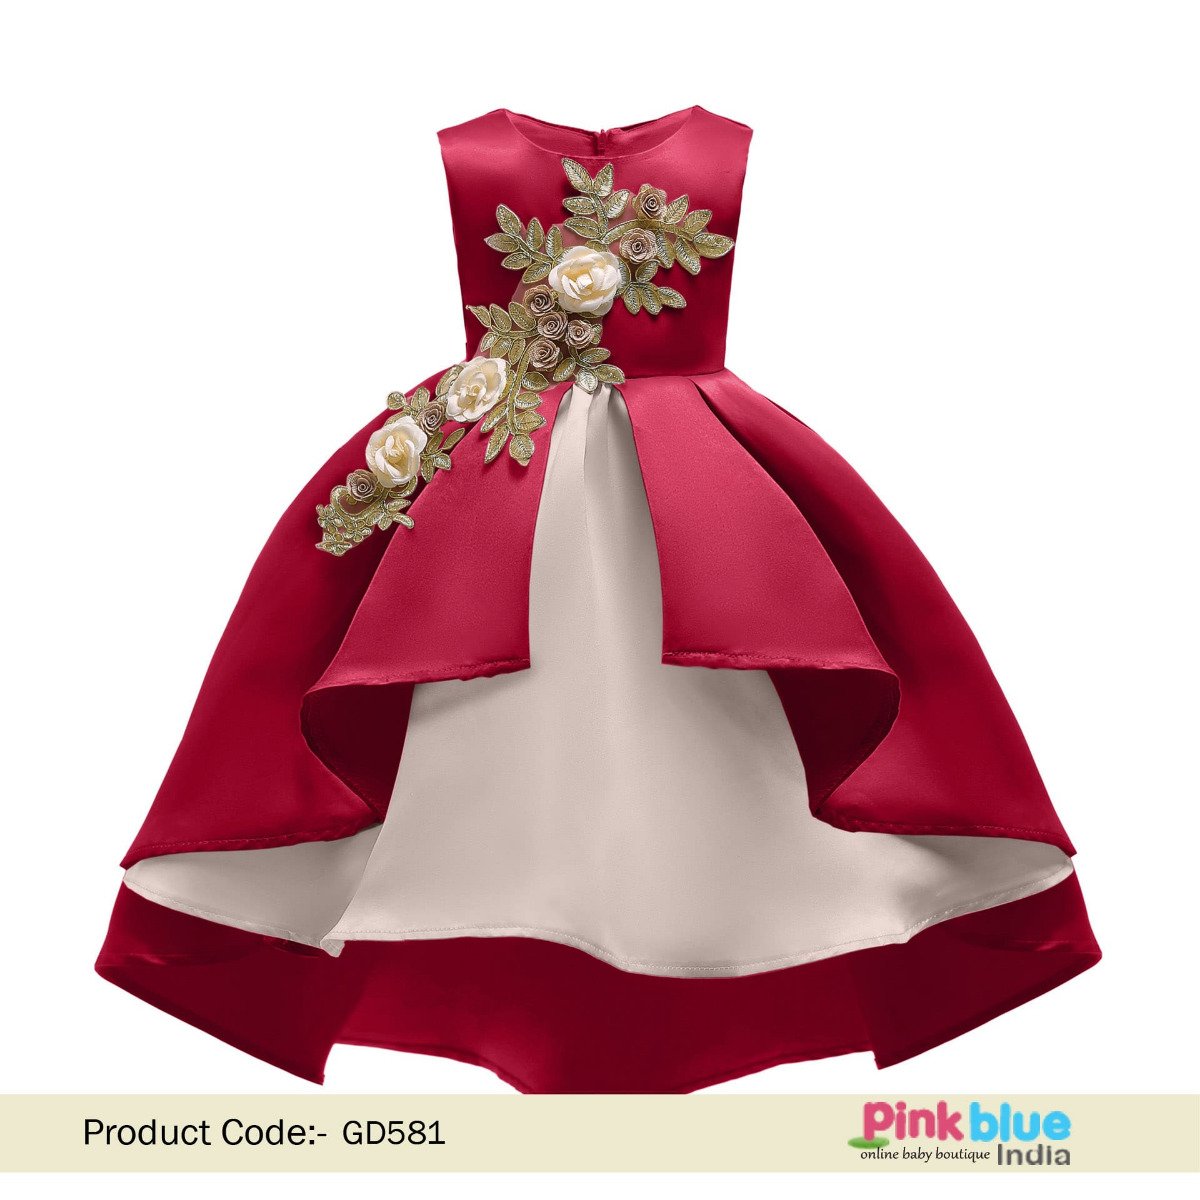 Kids Red Dress - Buy Red Frock for Girl- Red Party Dress Online